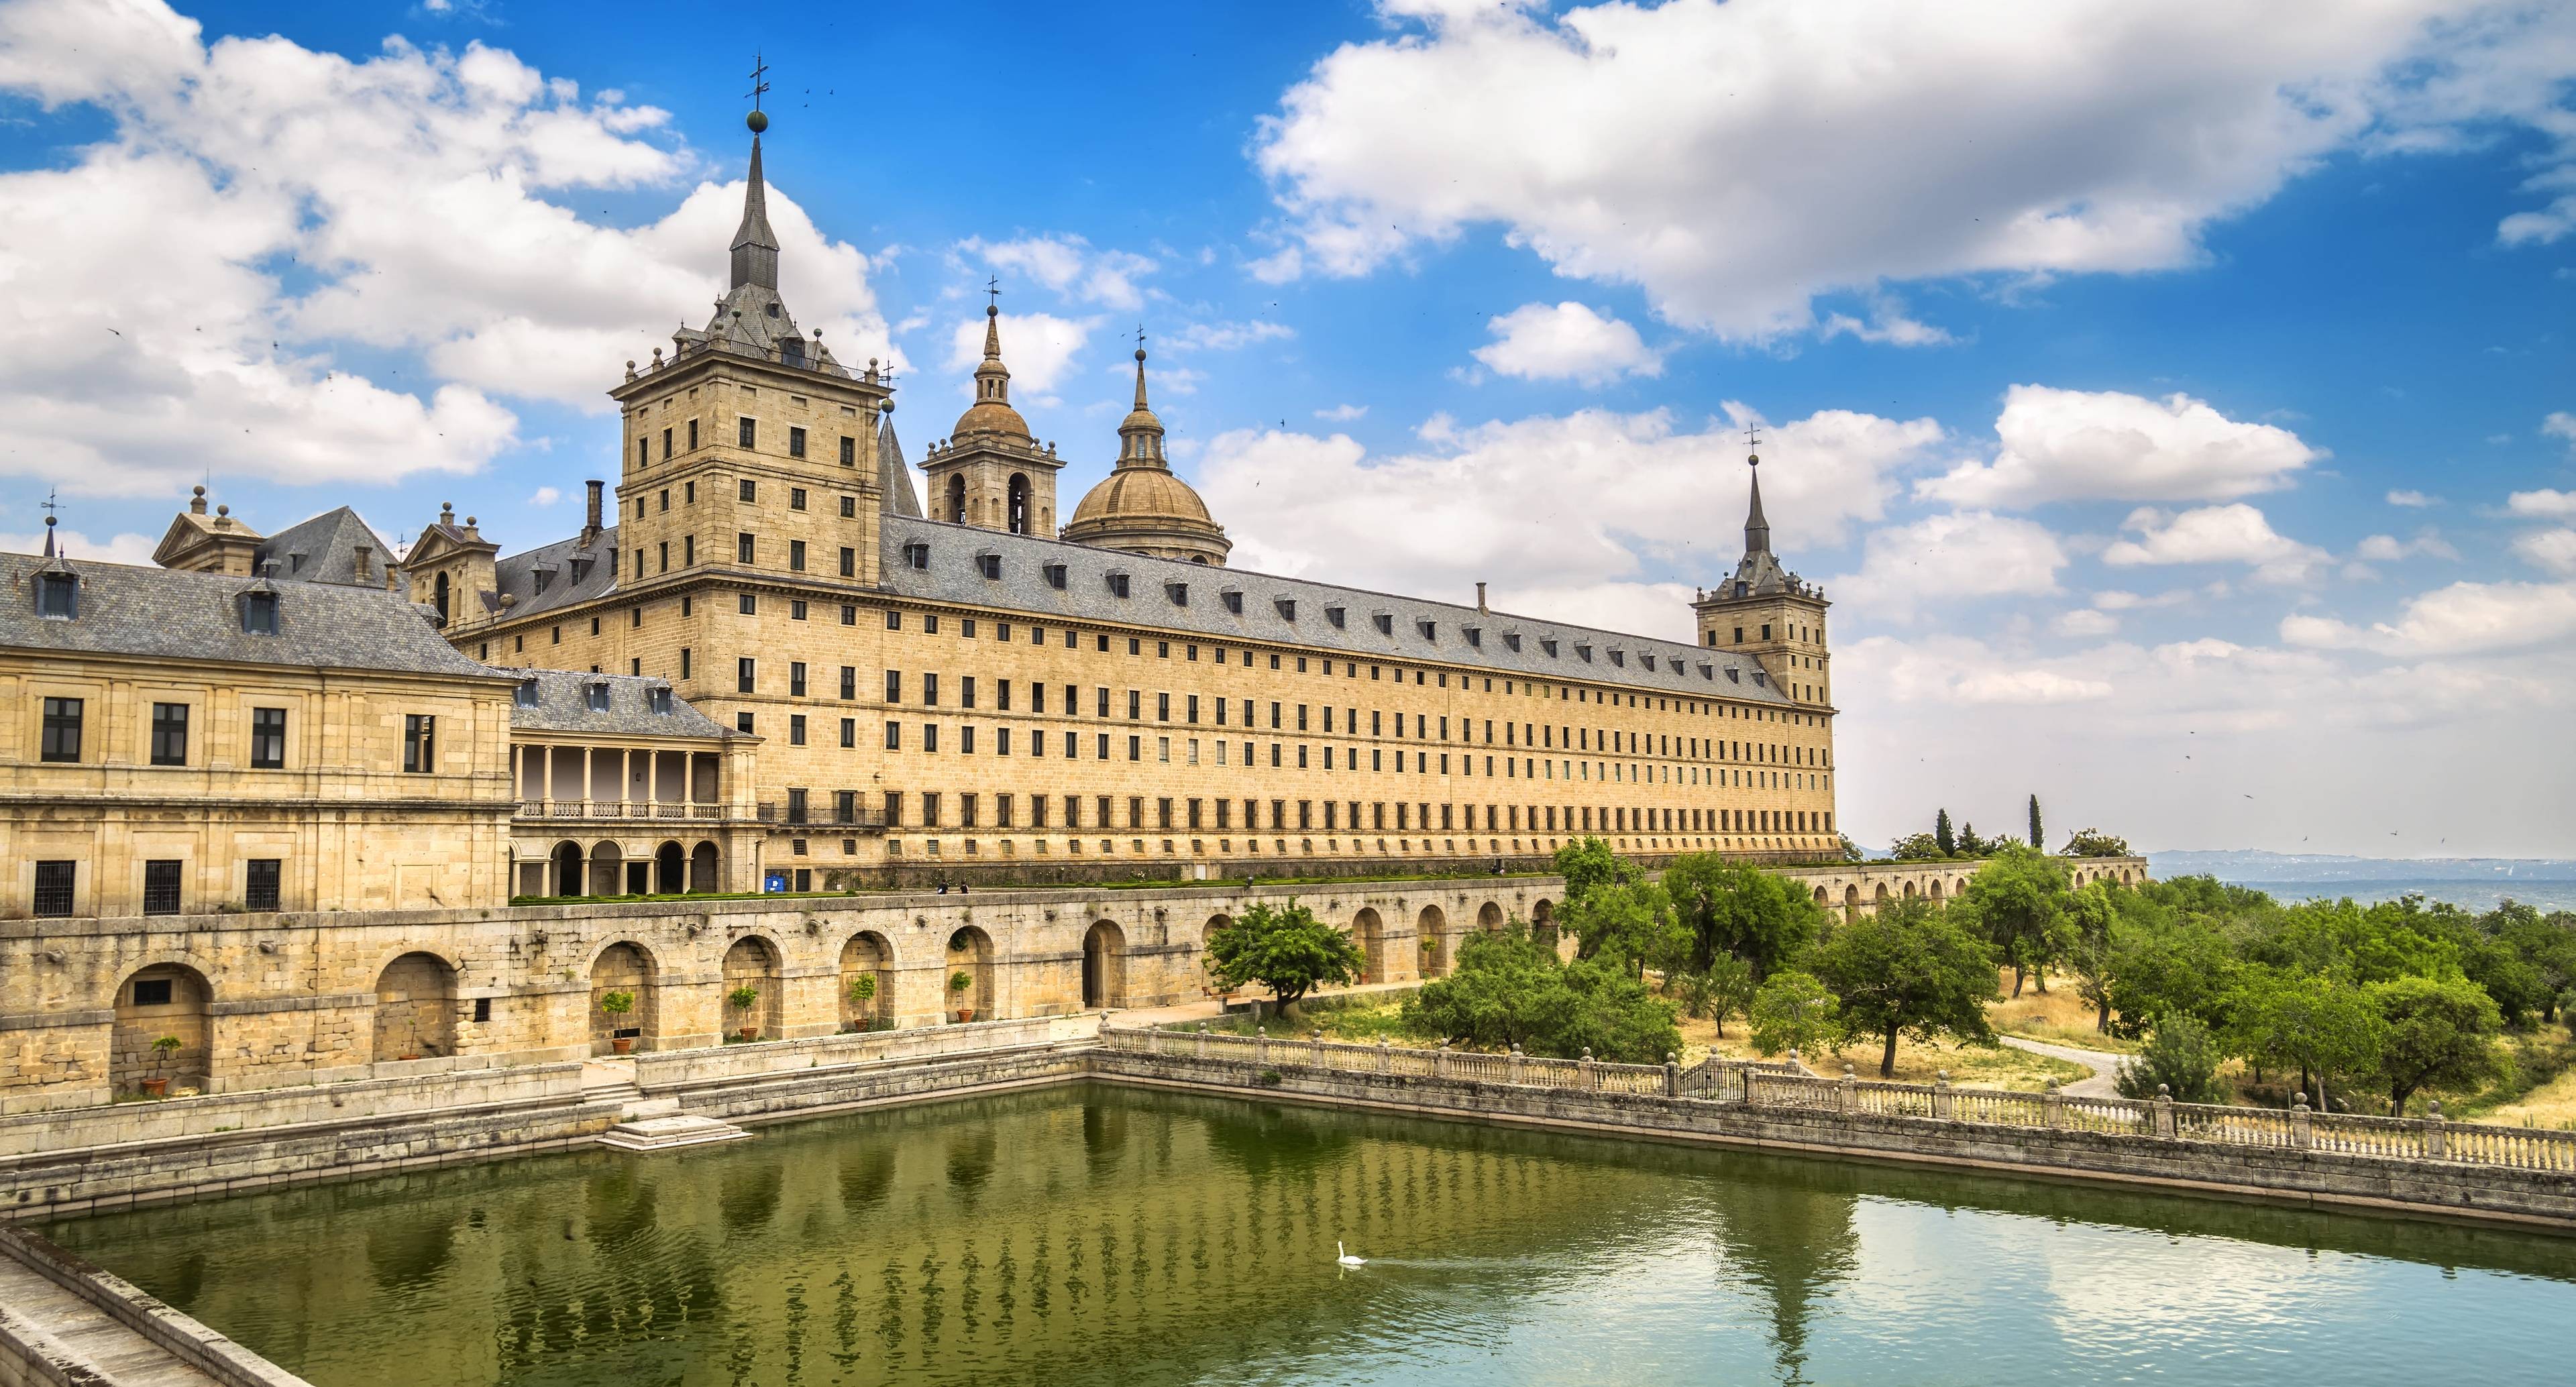 Escorial, the Burial Place of the Kings of Spain